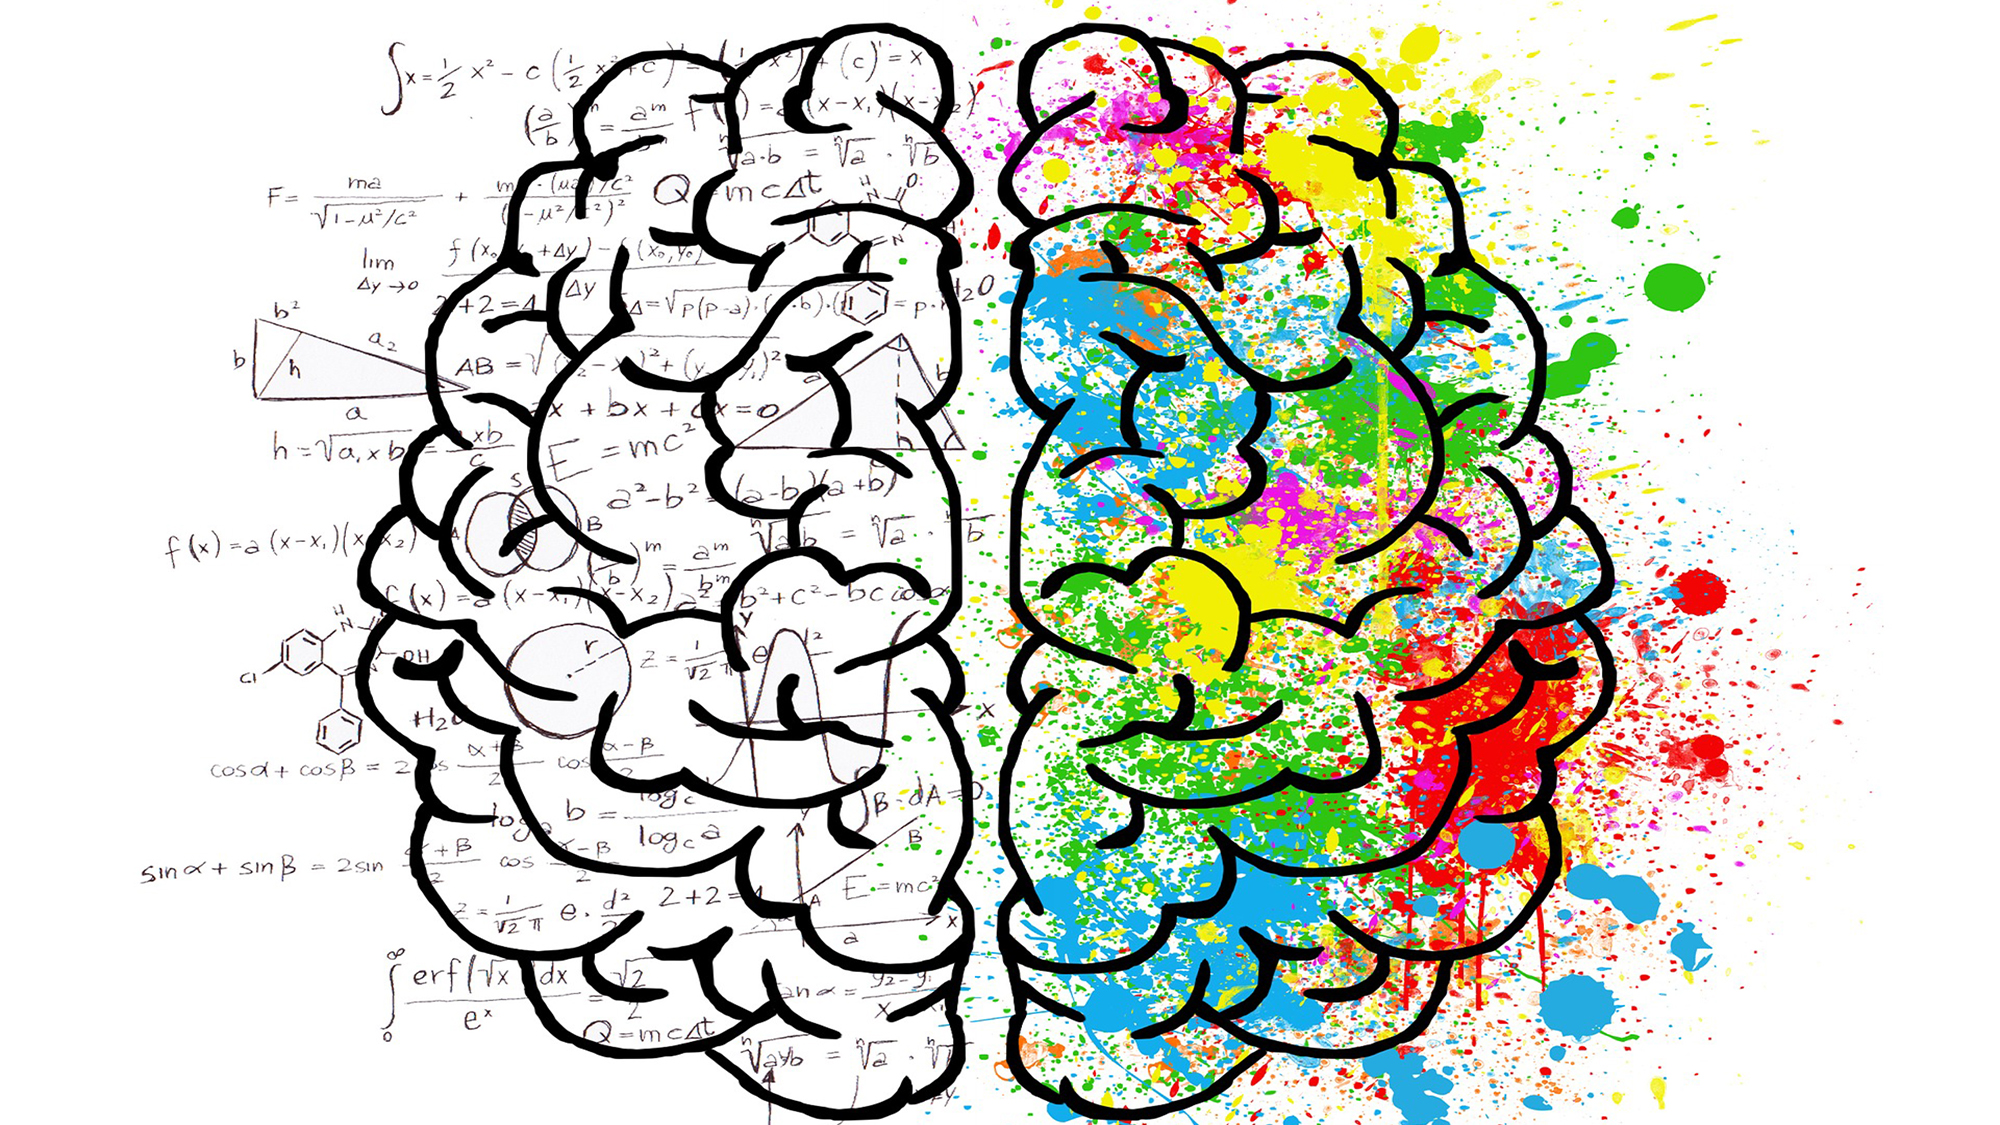 The brain: the right hemisphere records visual and spatial memories, such as drawings, while the left hemisphere registers verbal memory, for example wors or numbers. Image from Pixabay.